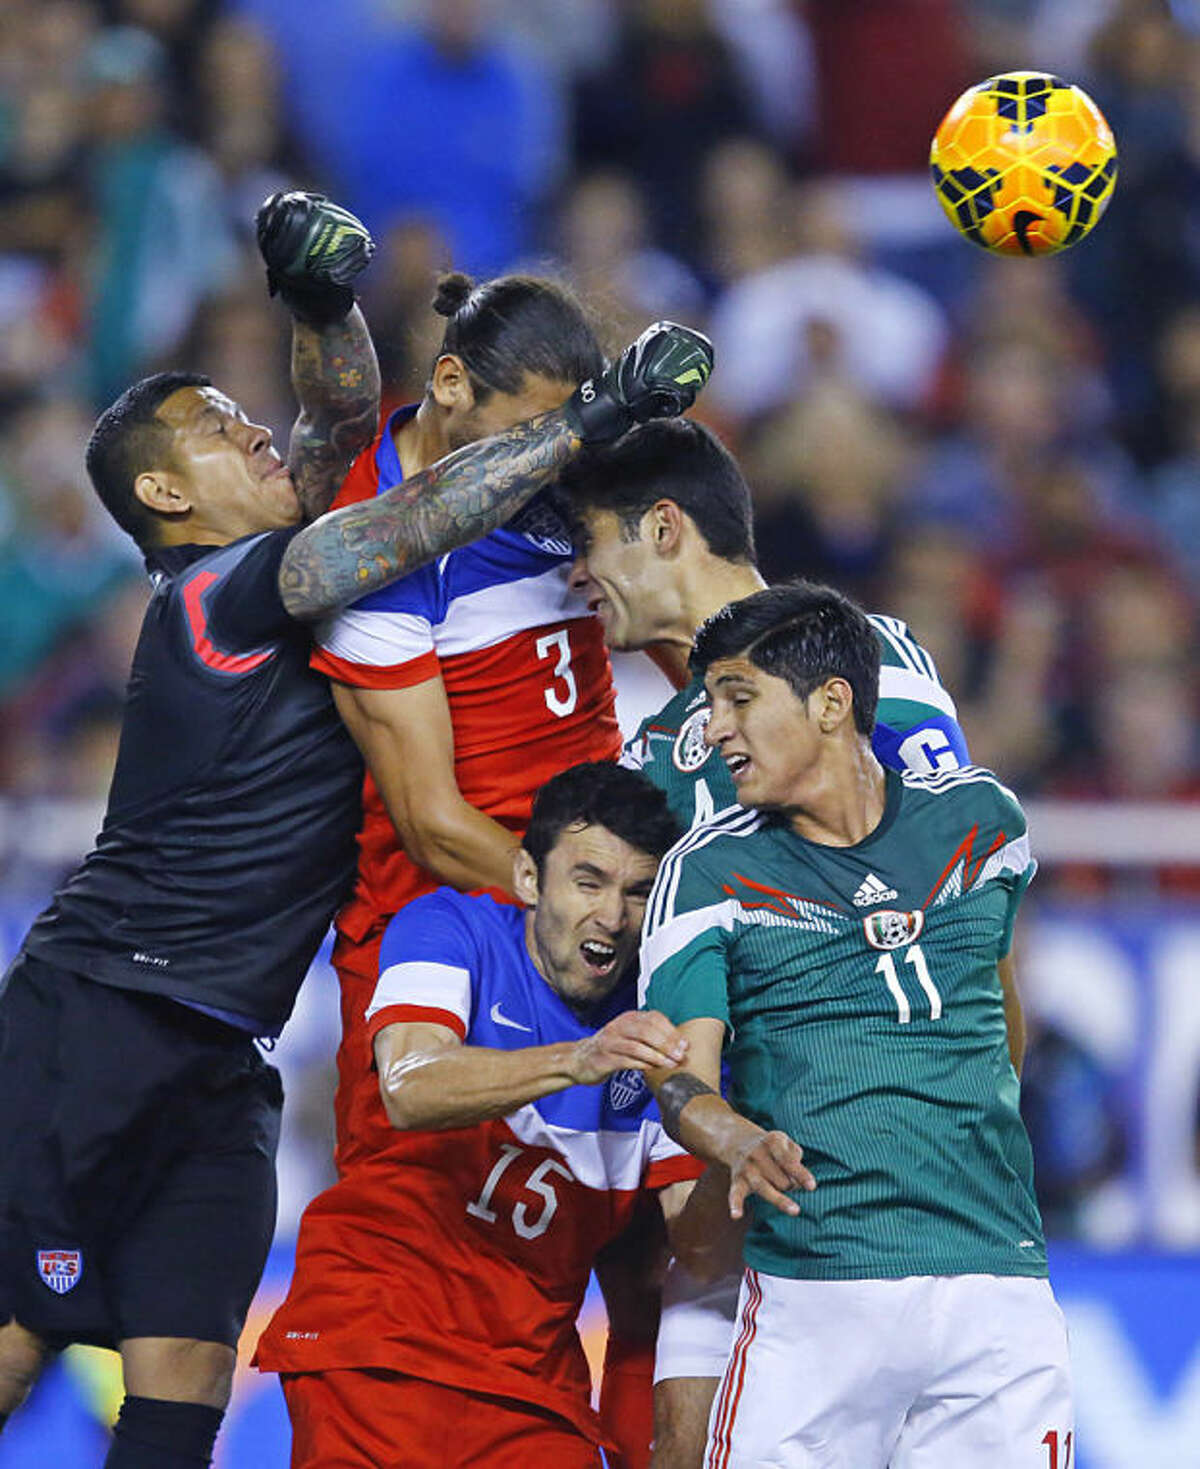 U.S. goalie Nick Rimando punches the ball to make a save against Mexico during an international friendly soccer match, Wednesday, April 2, 2014 in Glendale, Ariz. (AP Photo/The Arizona Republic, David Kadlubowski) MESA OUT MARICOPA COUNTY OUT MAGS OUT NO SALES